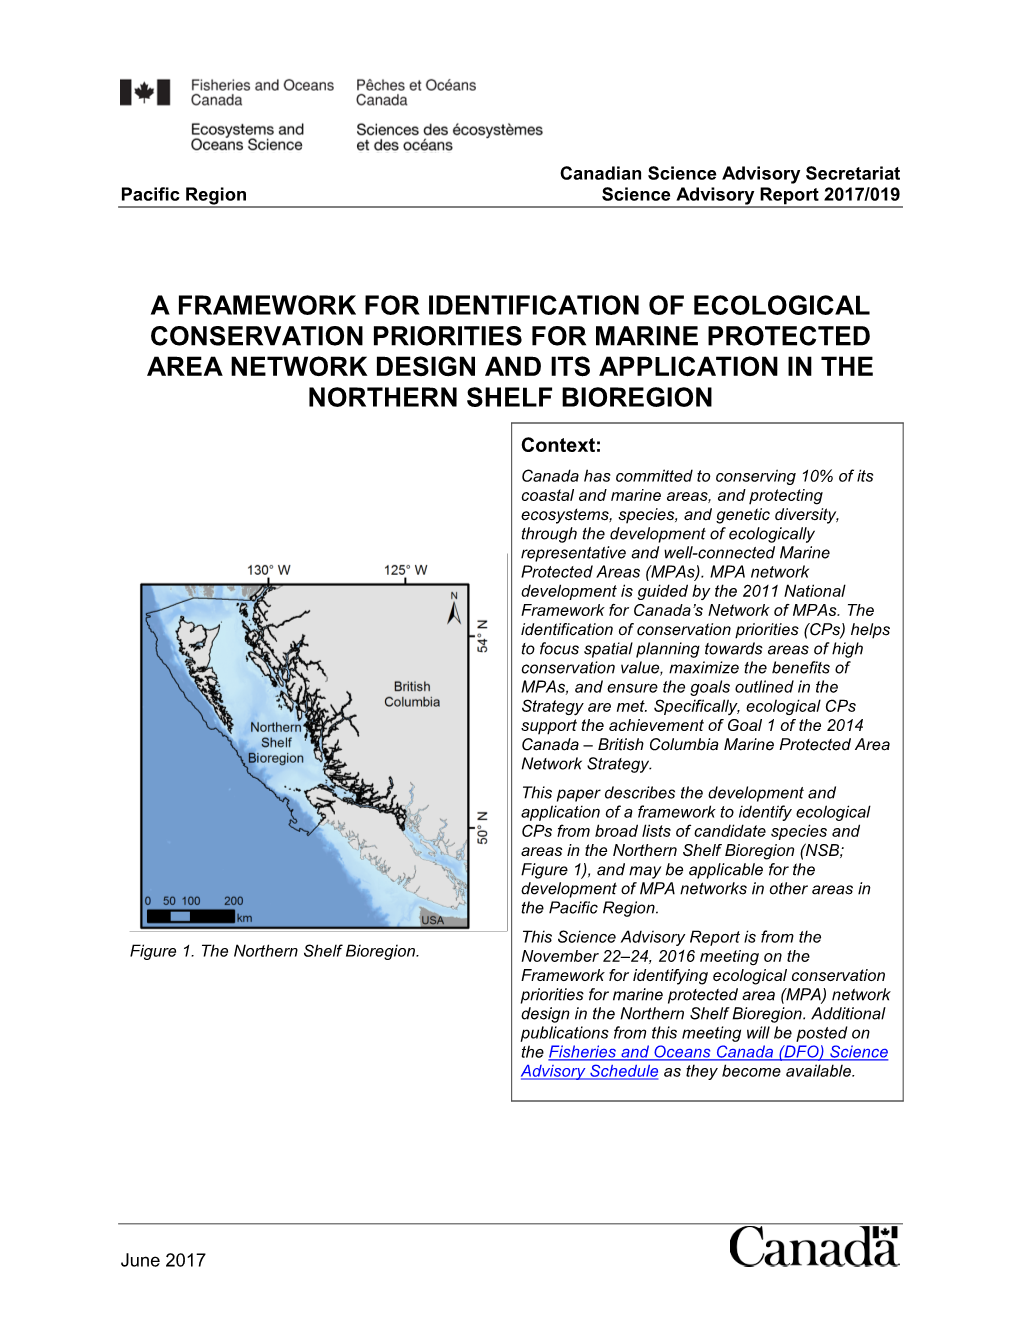 Framework for Identification of Ecological Conservation Priorities for Marine Protected Area Network Design and Its Application in the Northern Shelf Bioregion